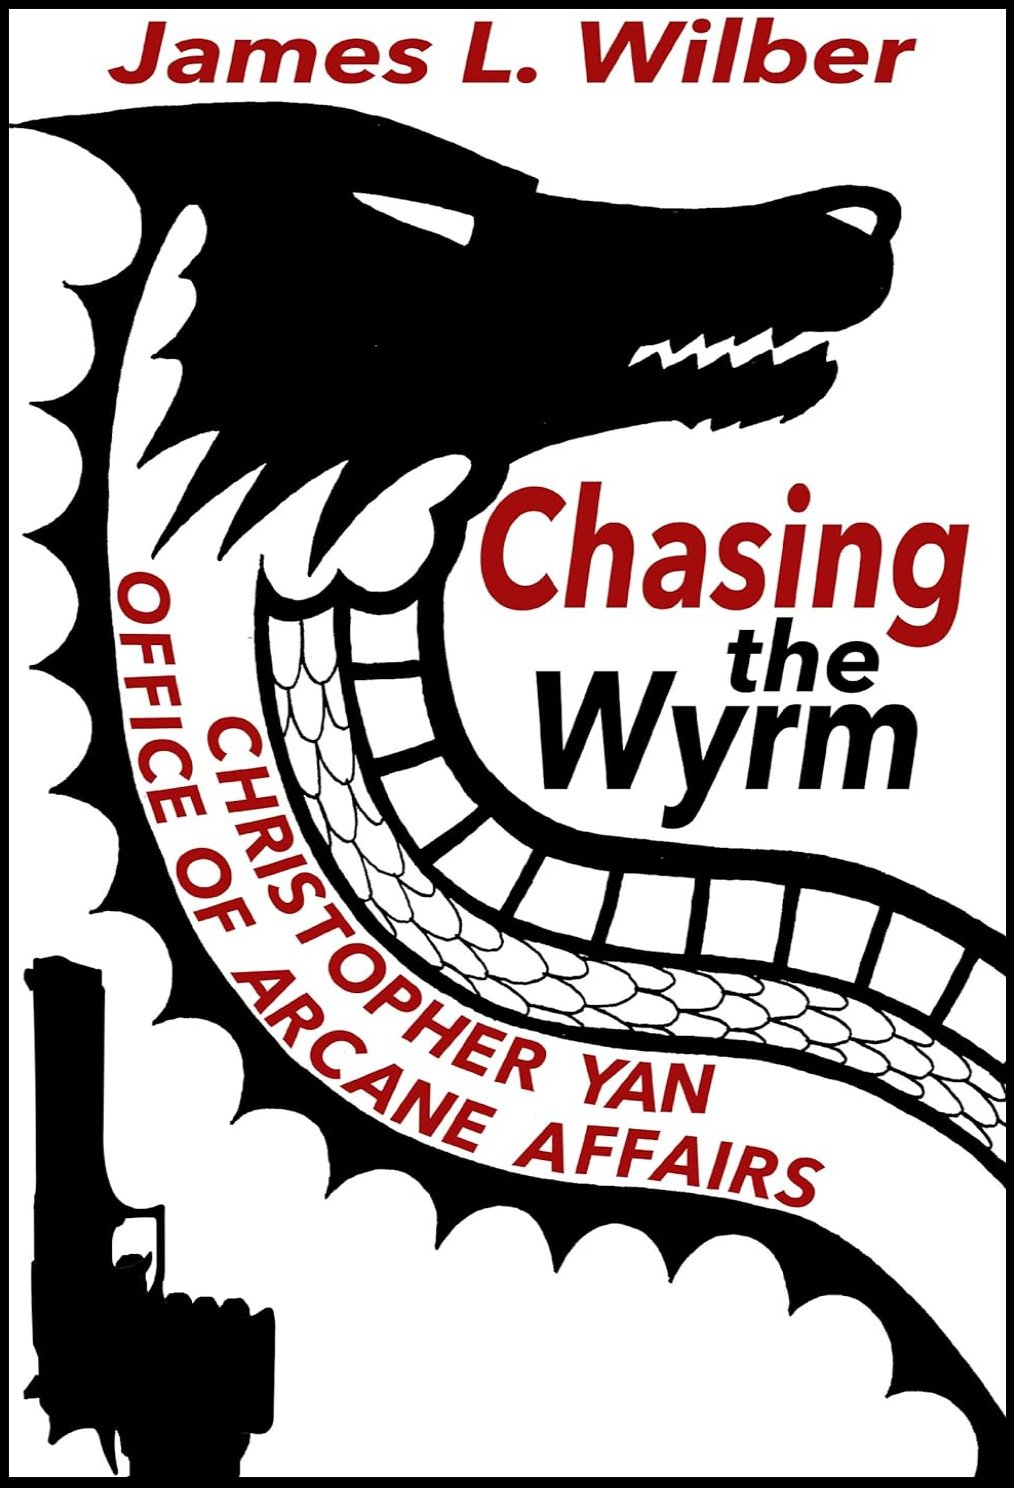 Chasing the Wyrm